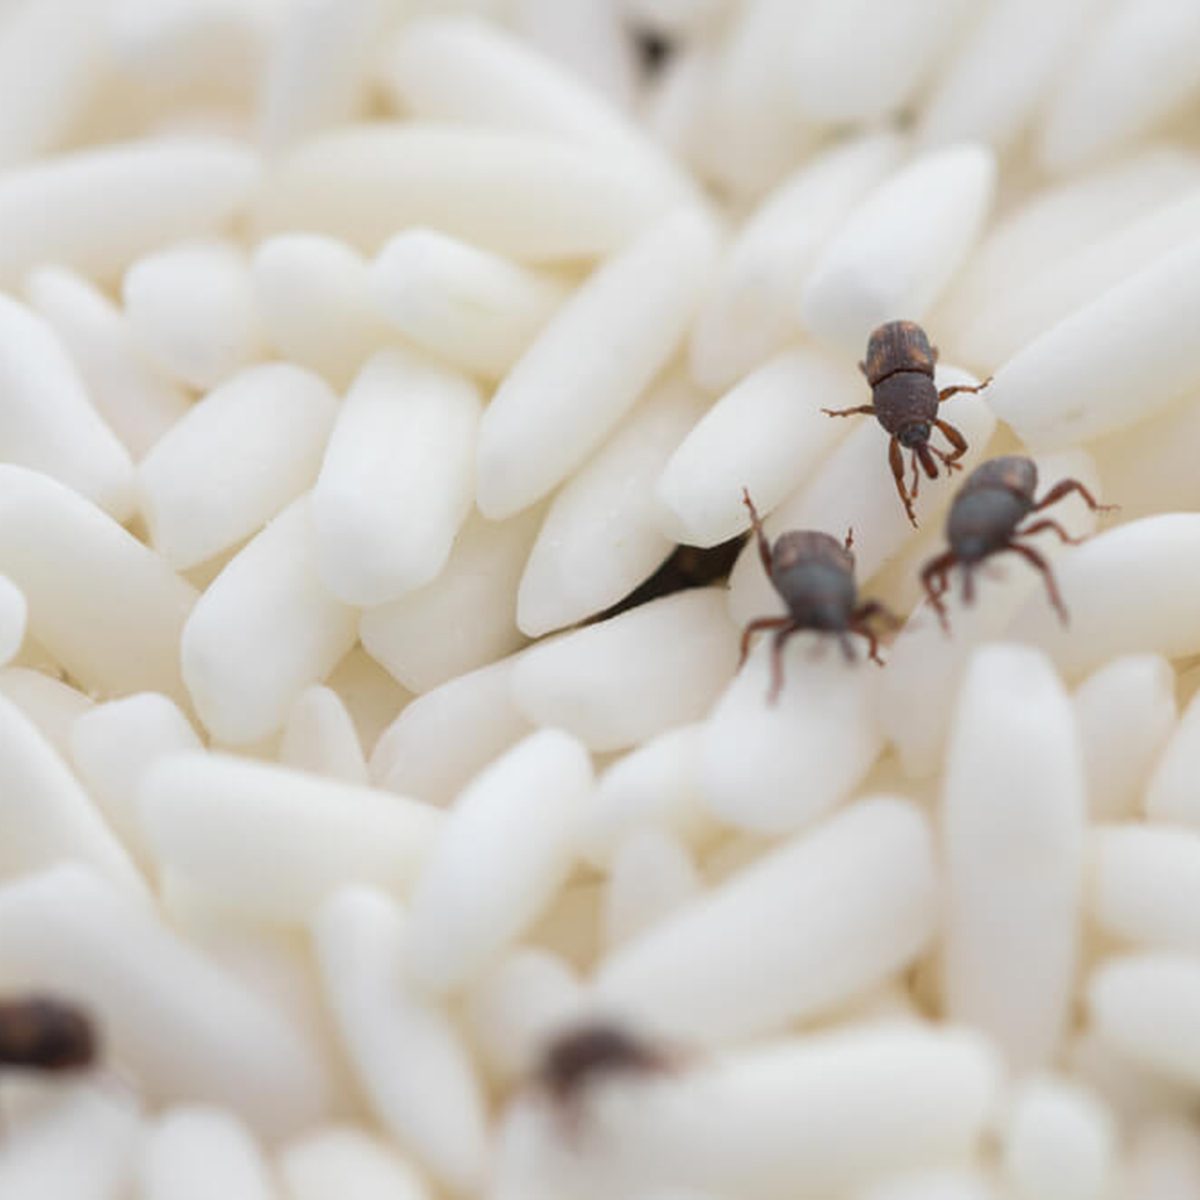 Are Pantry Pests inside your kitchen? - Dave's Pest Control